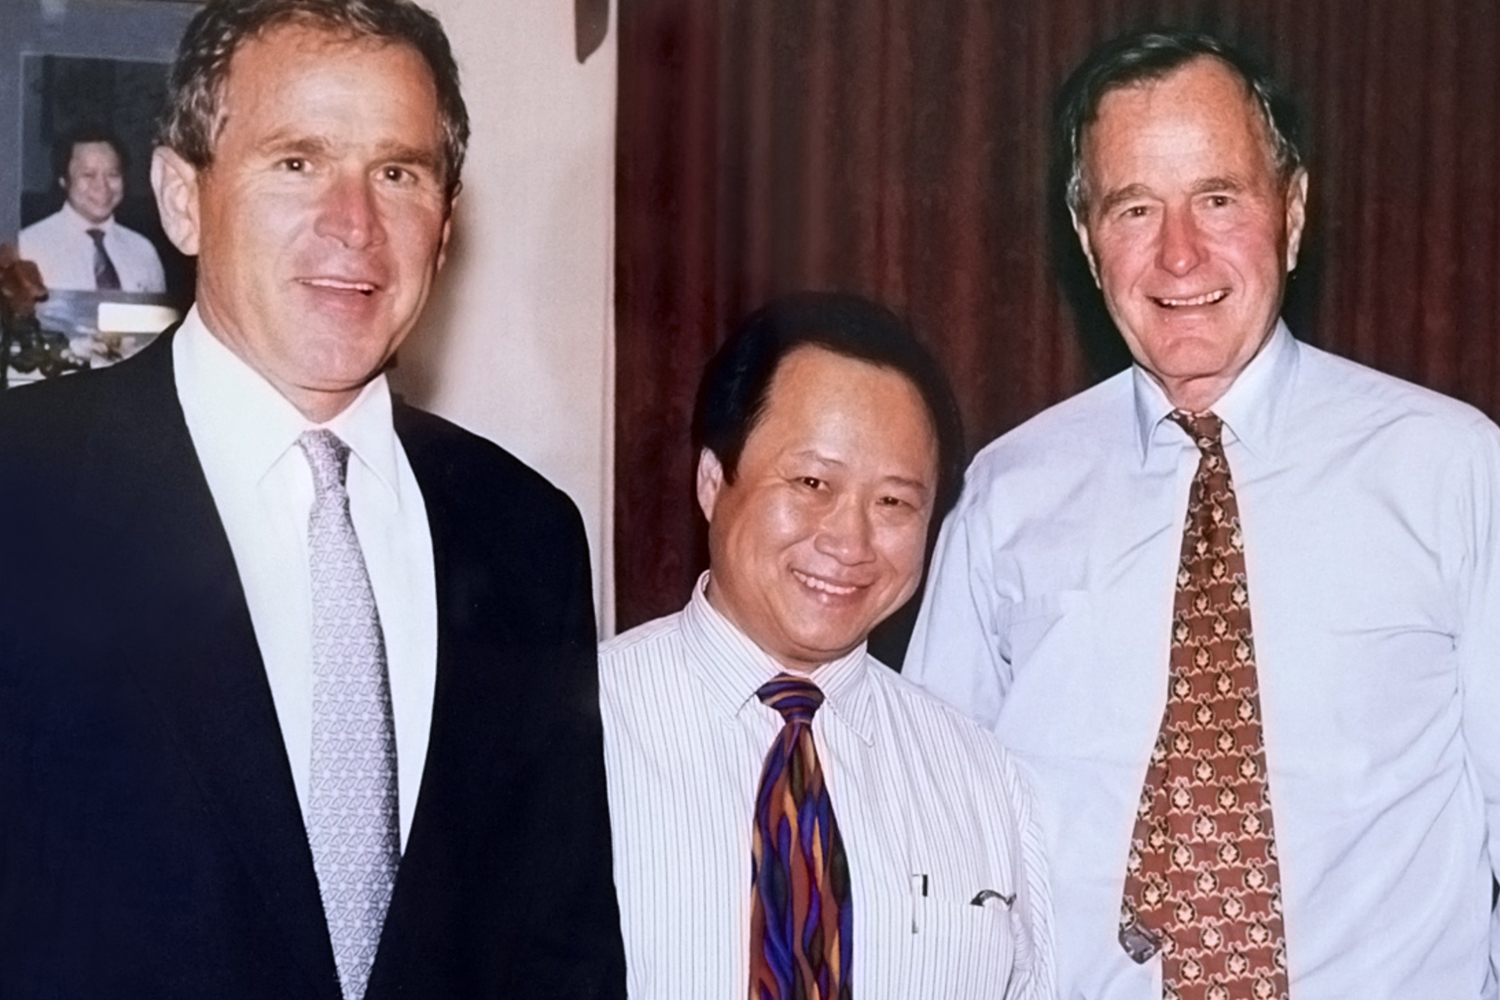 Presidents George Bush and George W. Bush with the owner of Peking Gourmet Inn.